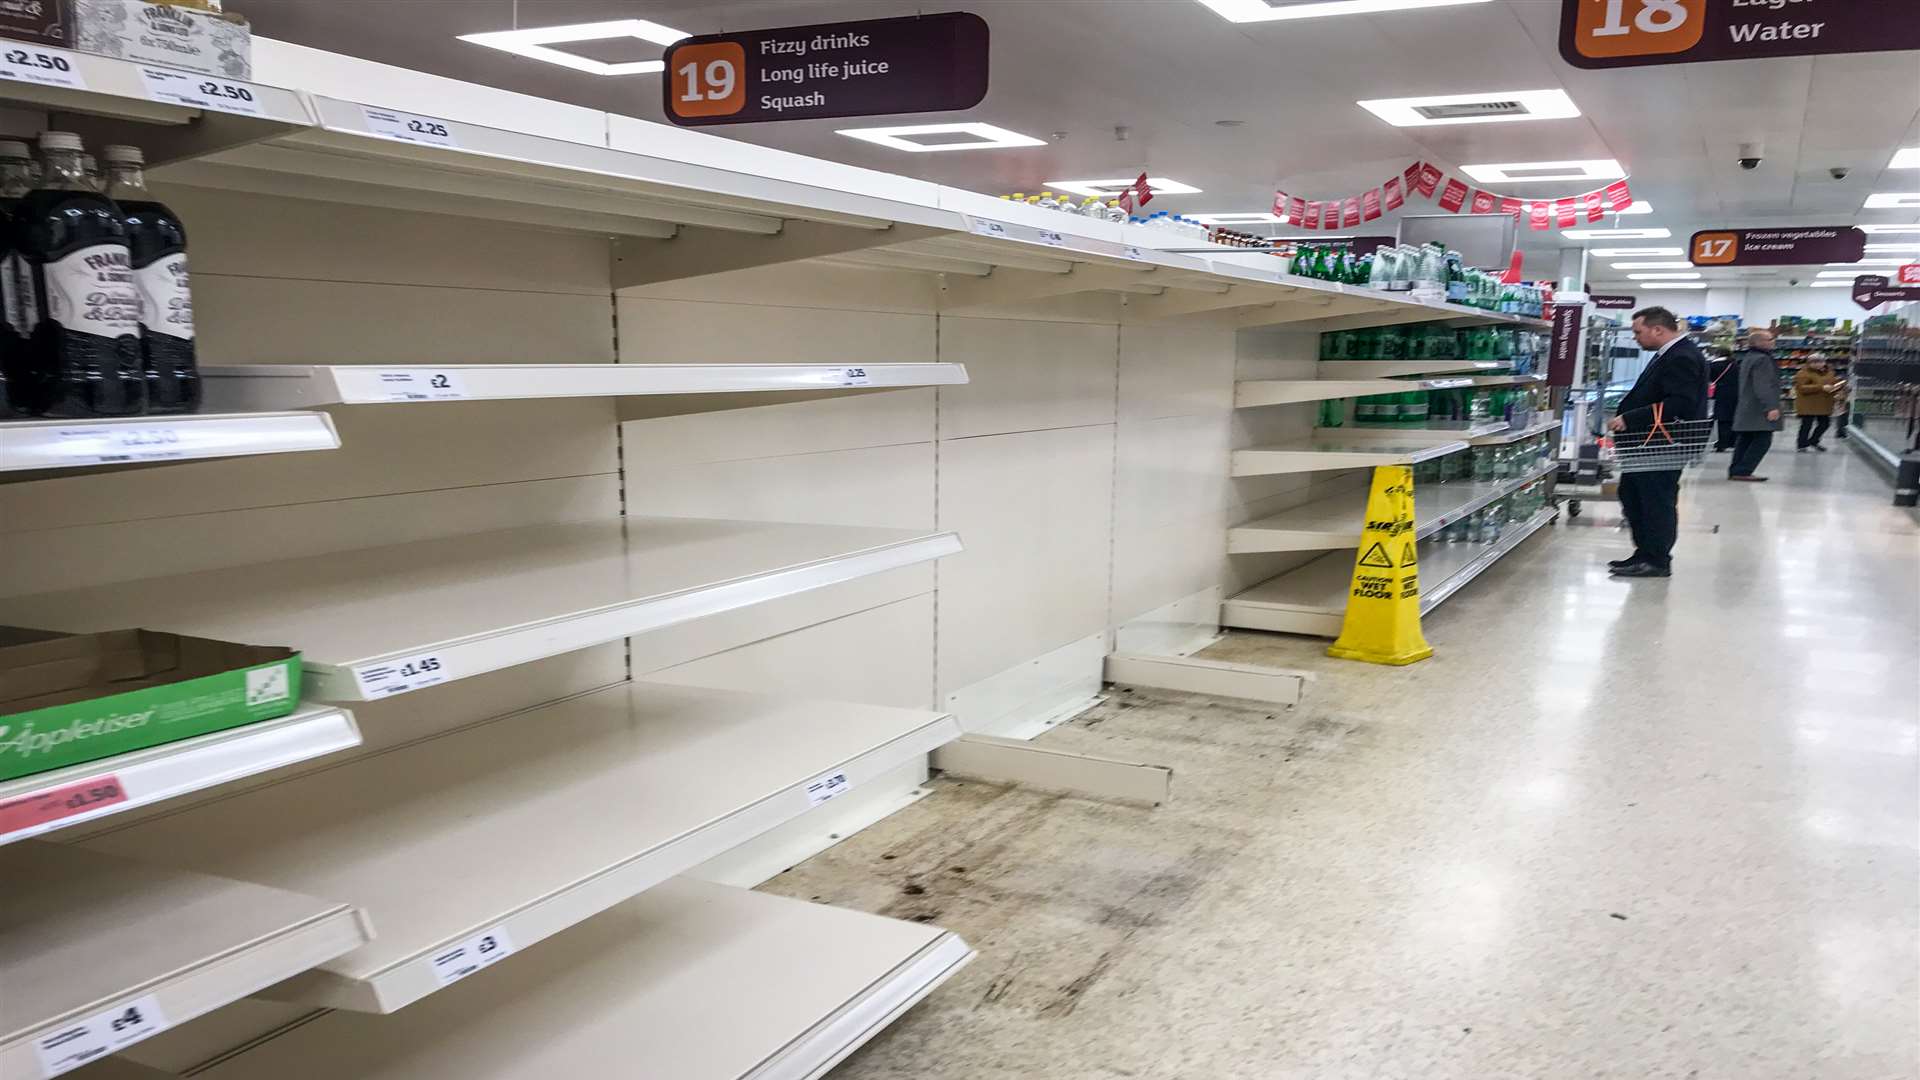 The water shortage hit the shelves at Sainsbury's in Sittingbourne